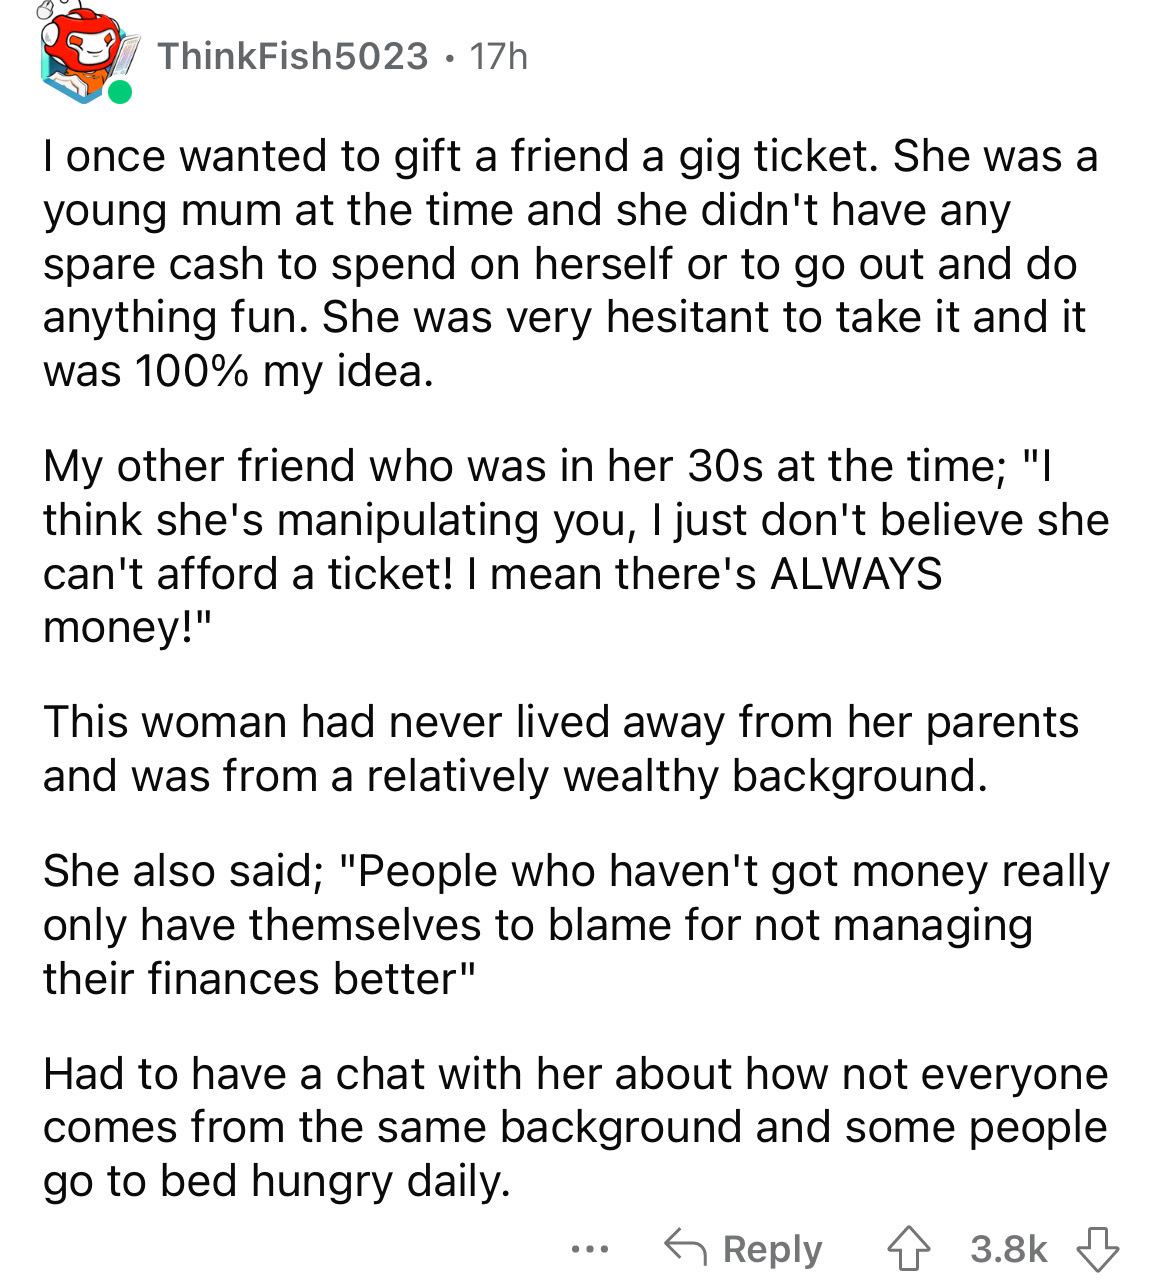 angle - ThinkFish5023 17h I once wanted to gift a friend a gig ticket. She was a young mum at the time and she didn't have any spare cash to spend on herself or to go out and do anything fun. She was very hesitant to take it and it was 100% my idea. My ot